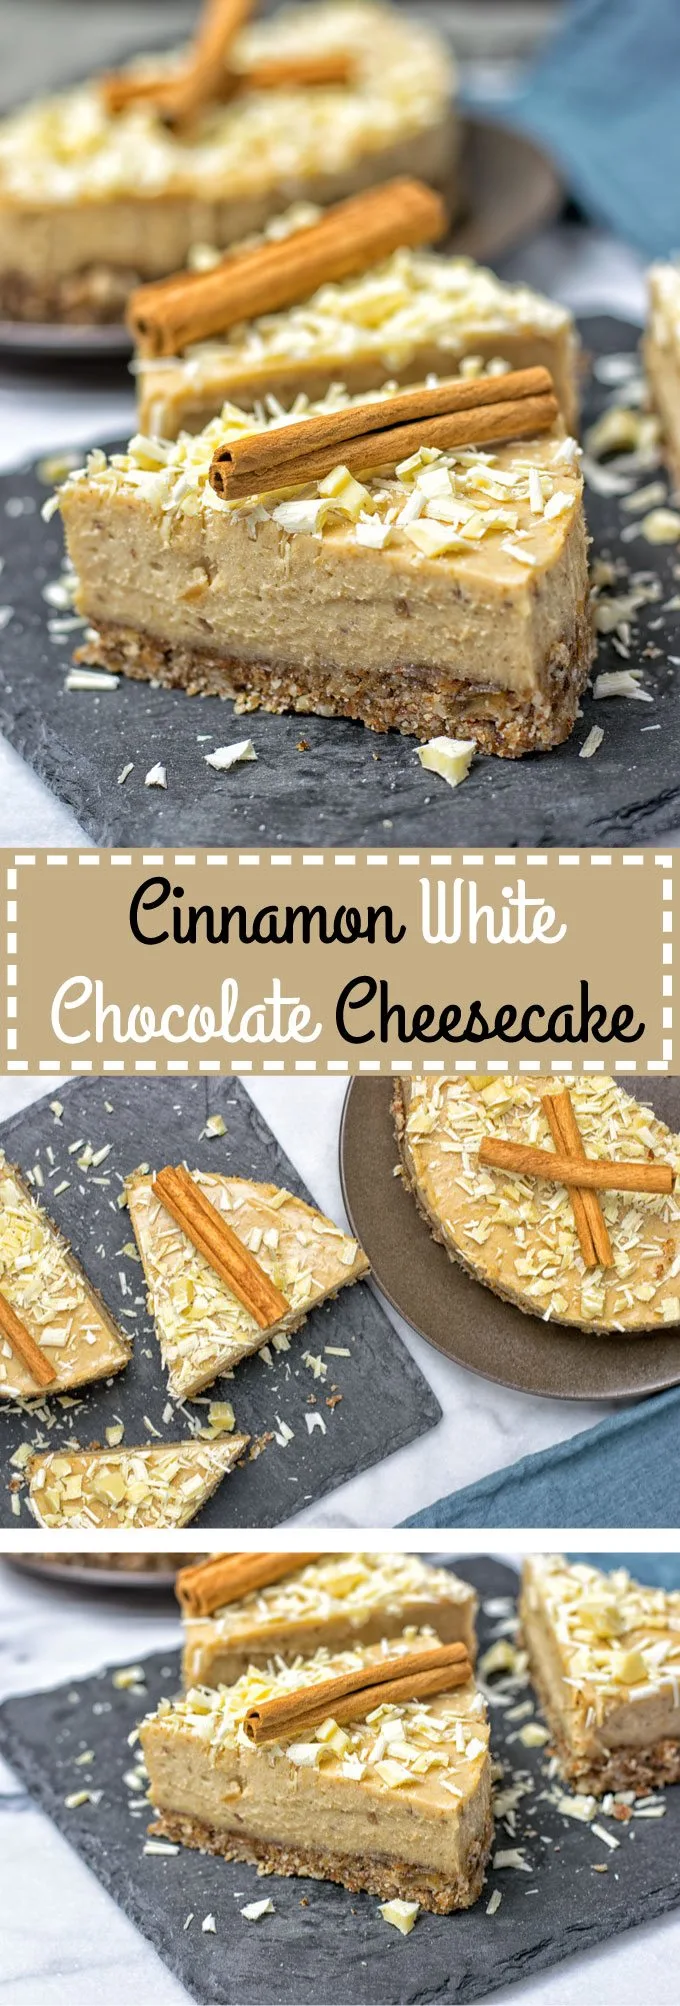 Collage of two pictures of Cinnamon White Chocolate Cheesecake with recipe title text.